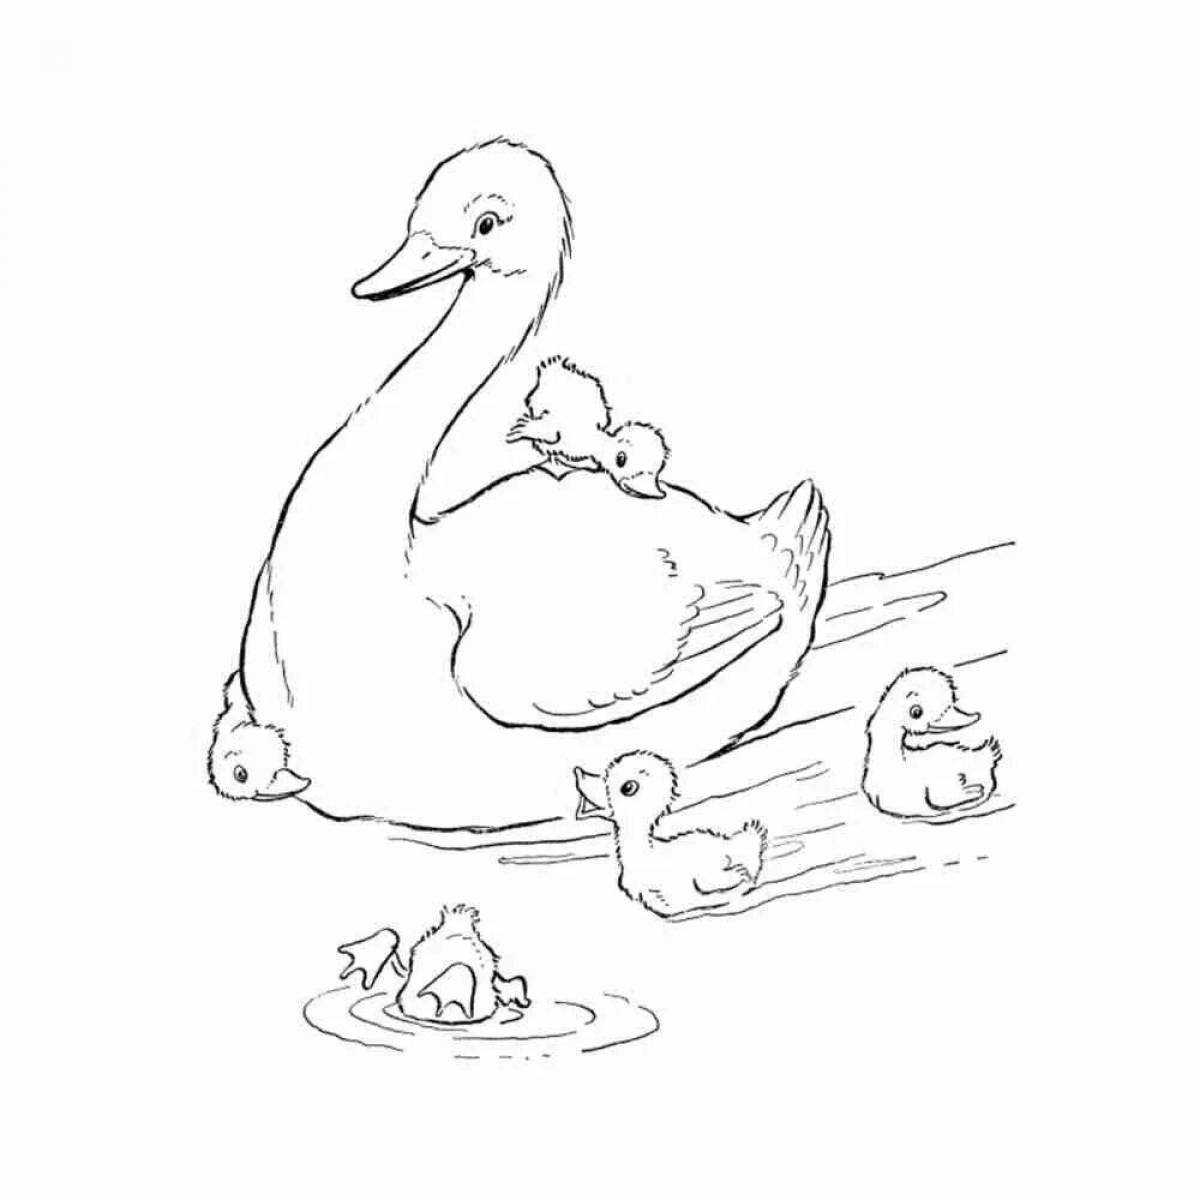 Sunny duckling with ducklings